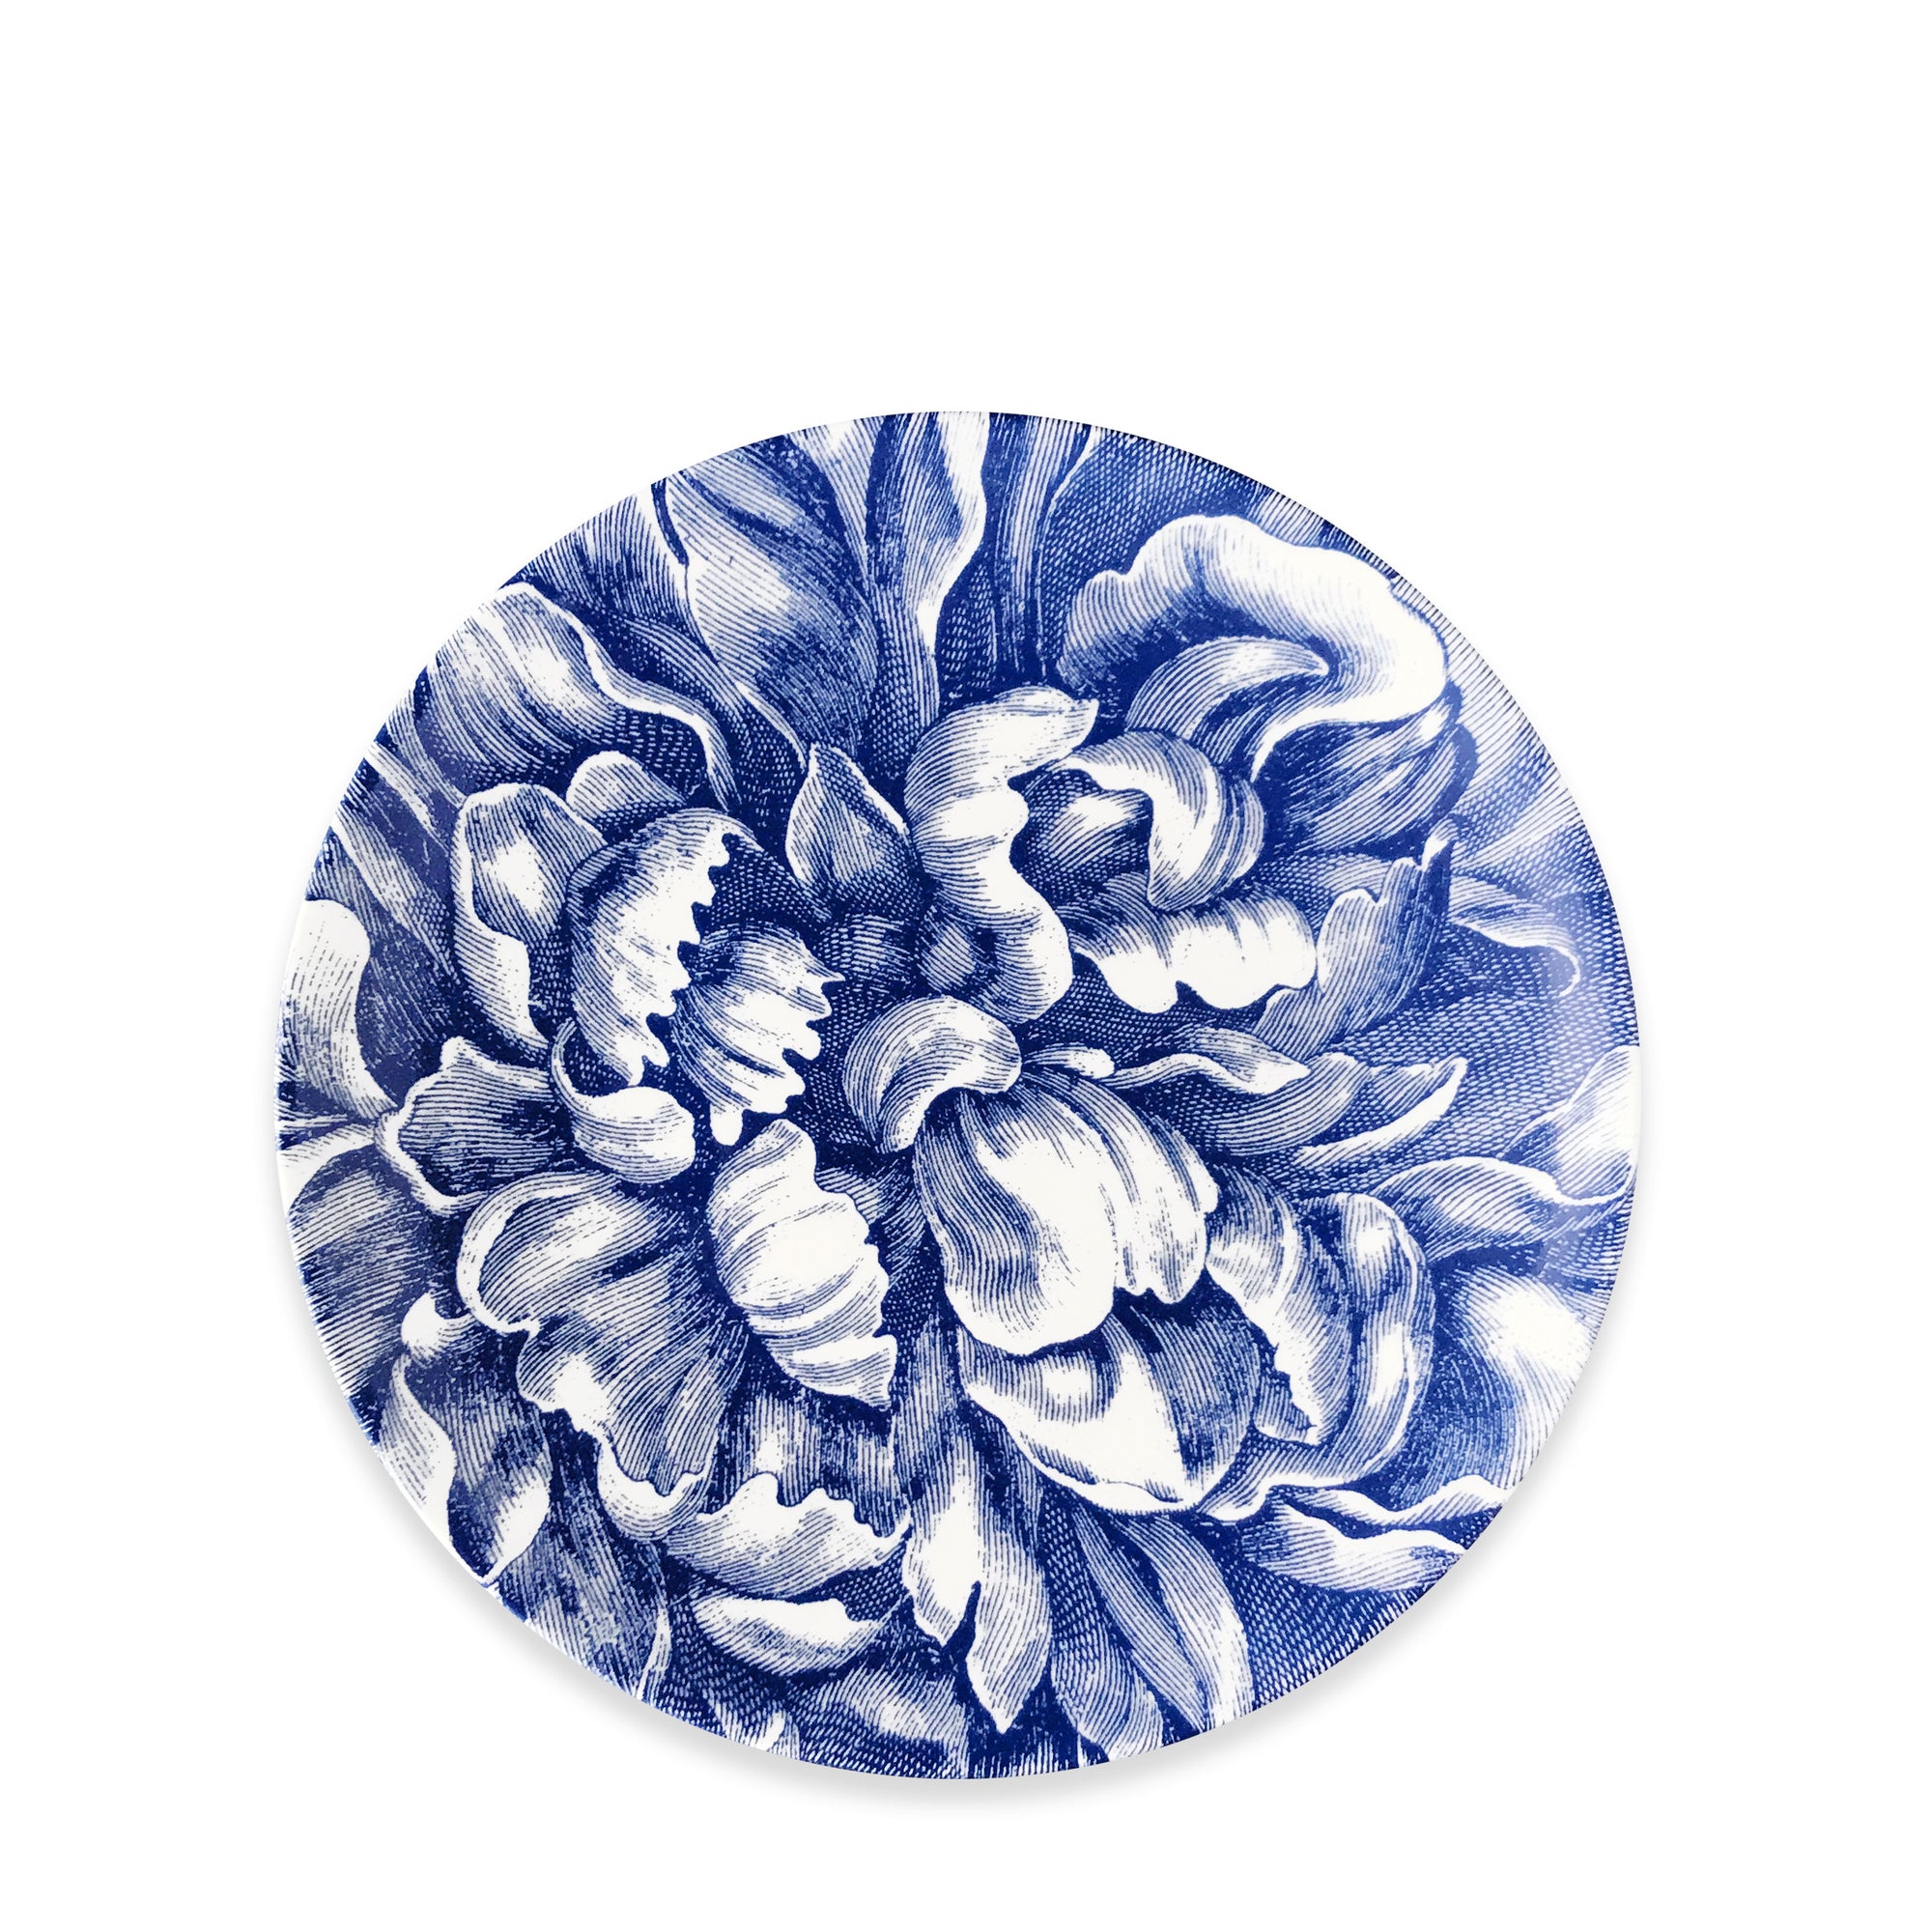 Round porcelain plate featuring a detailed blue floral design on a white background: Peony Coupe Salad Plate by Caskata Artisanal Home.